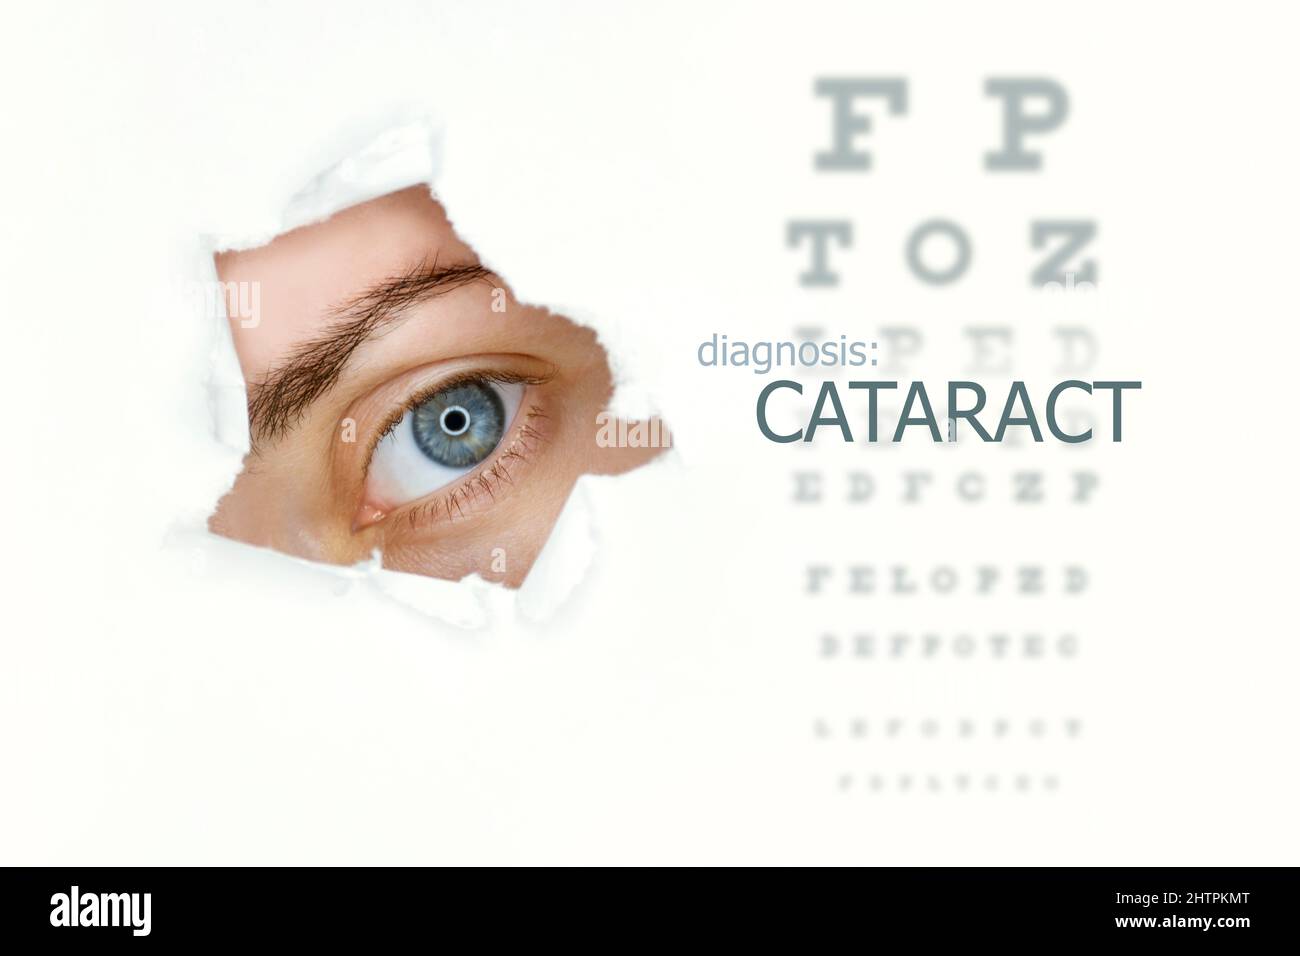 Cataract disease poster with eye test chart and  blue eye on left.Isolated on white Stock Photo